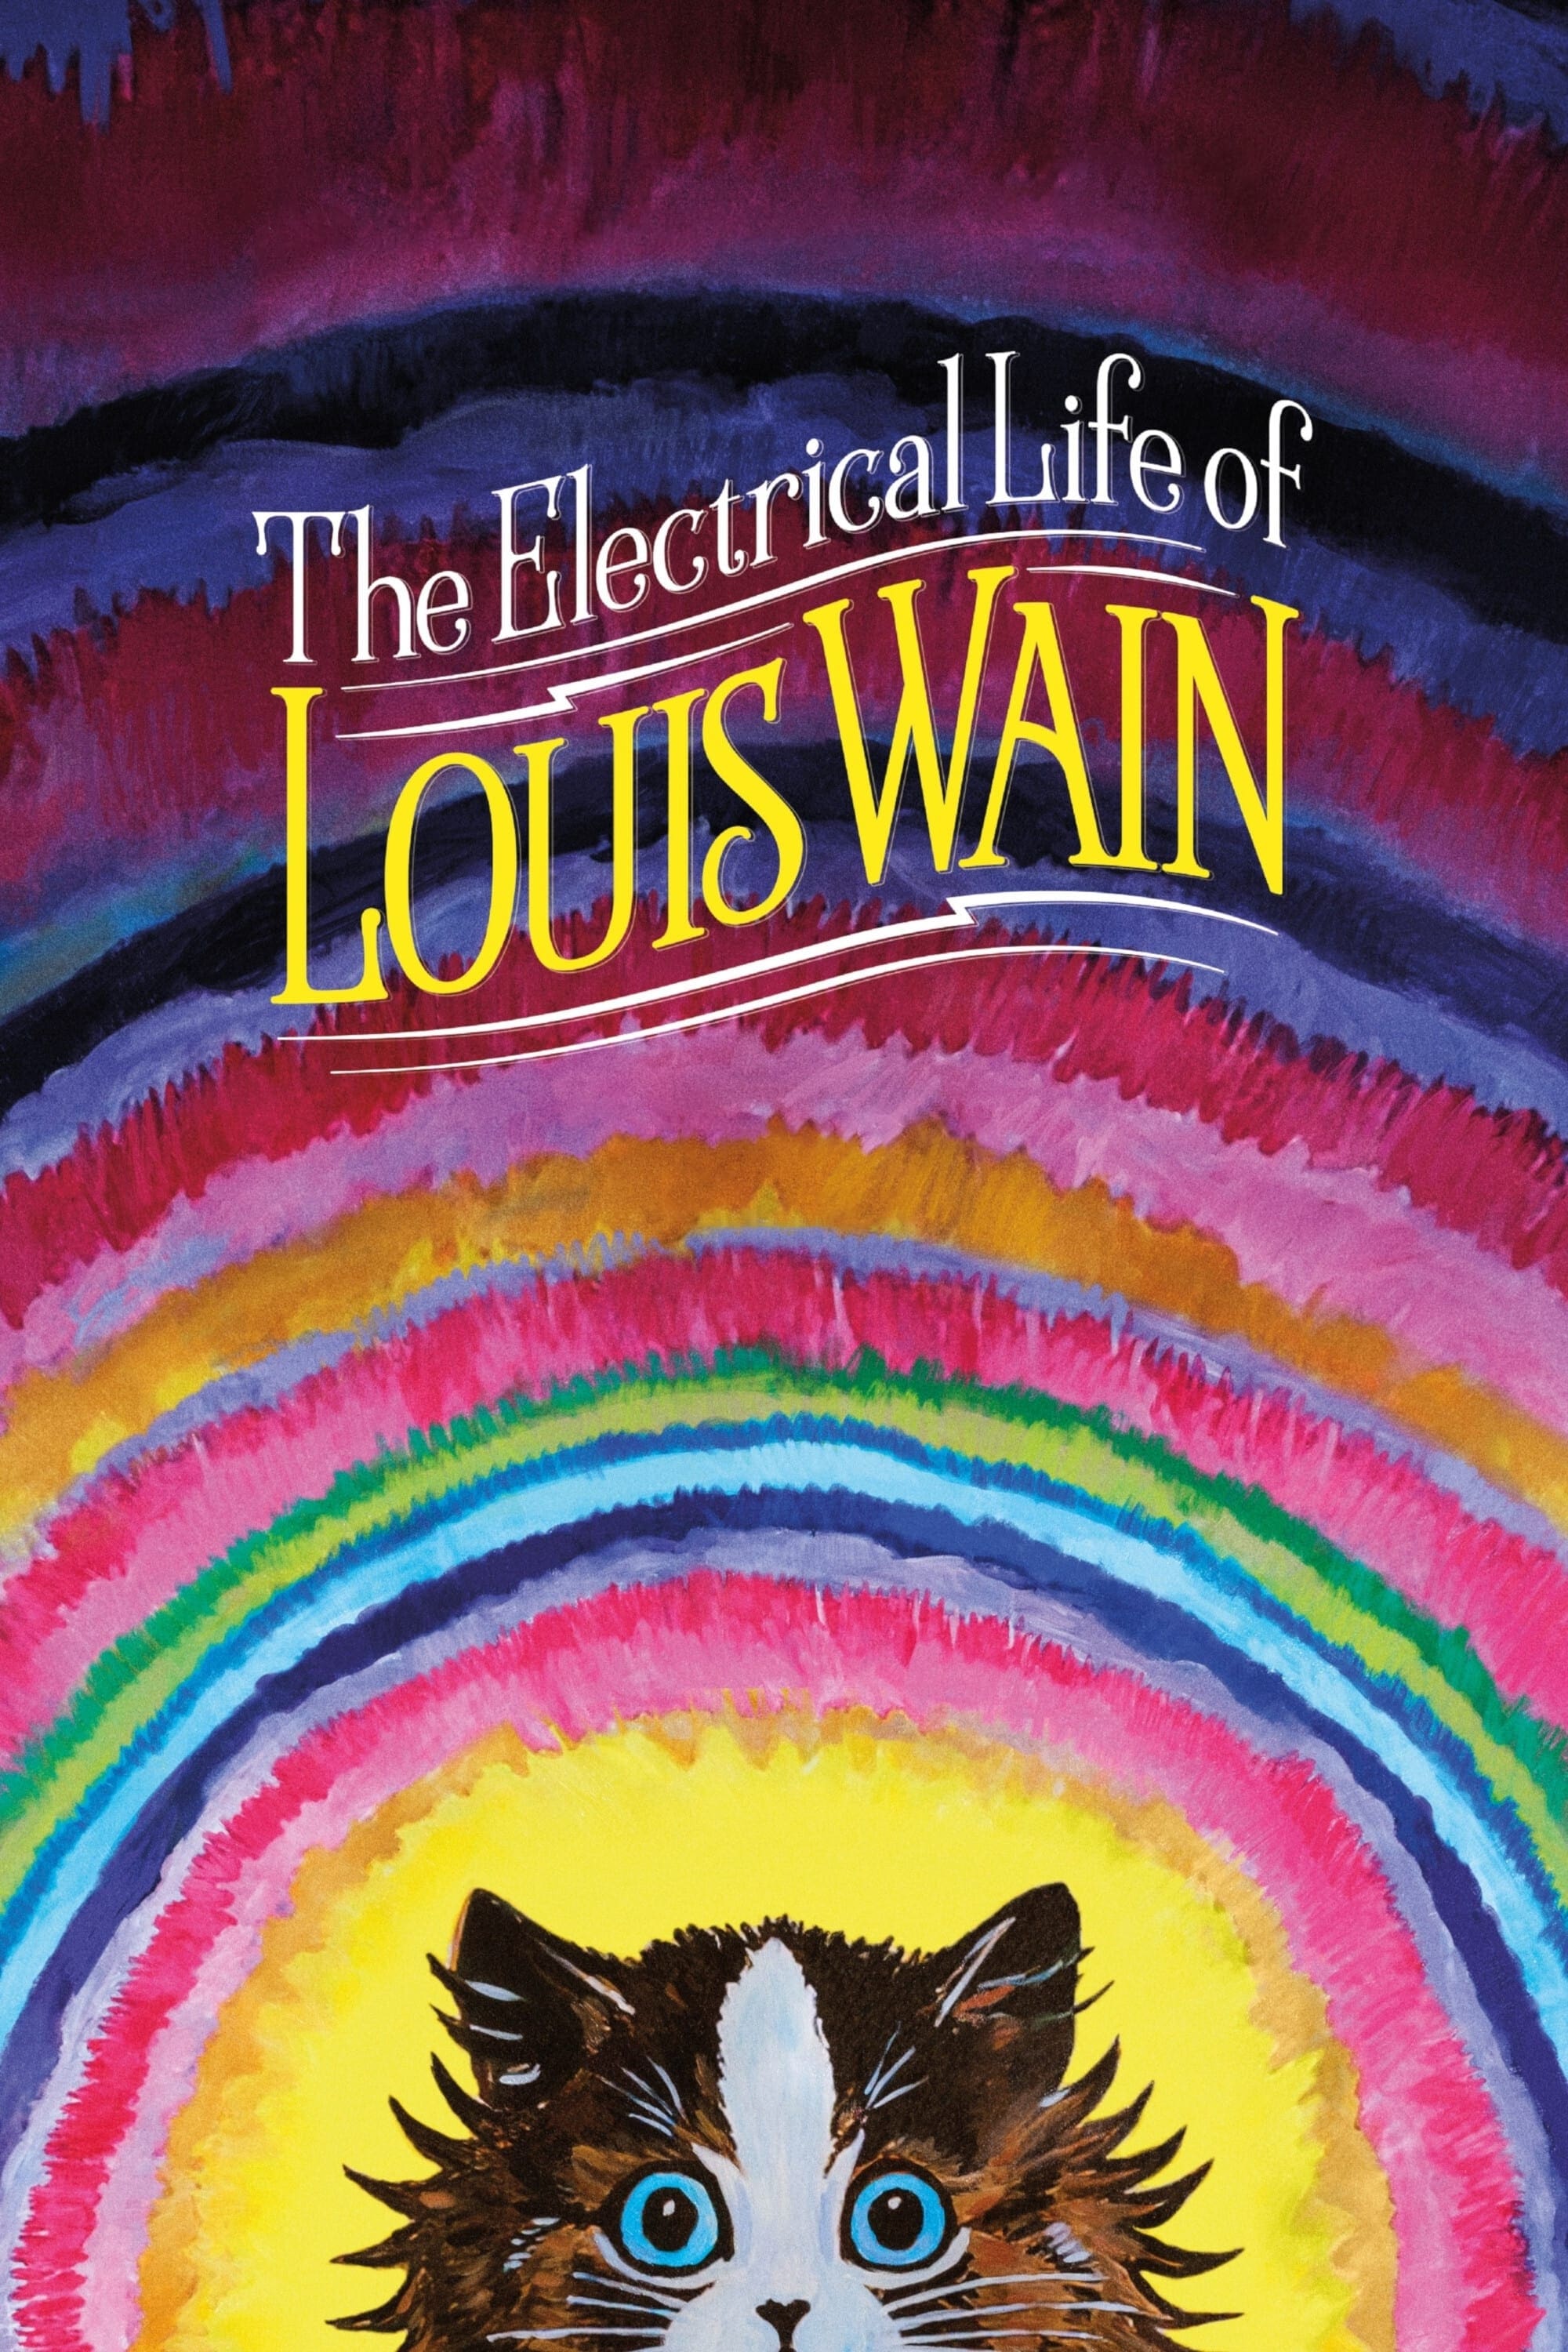 movie review the electrical life of louis wain